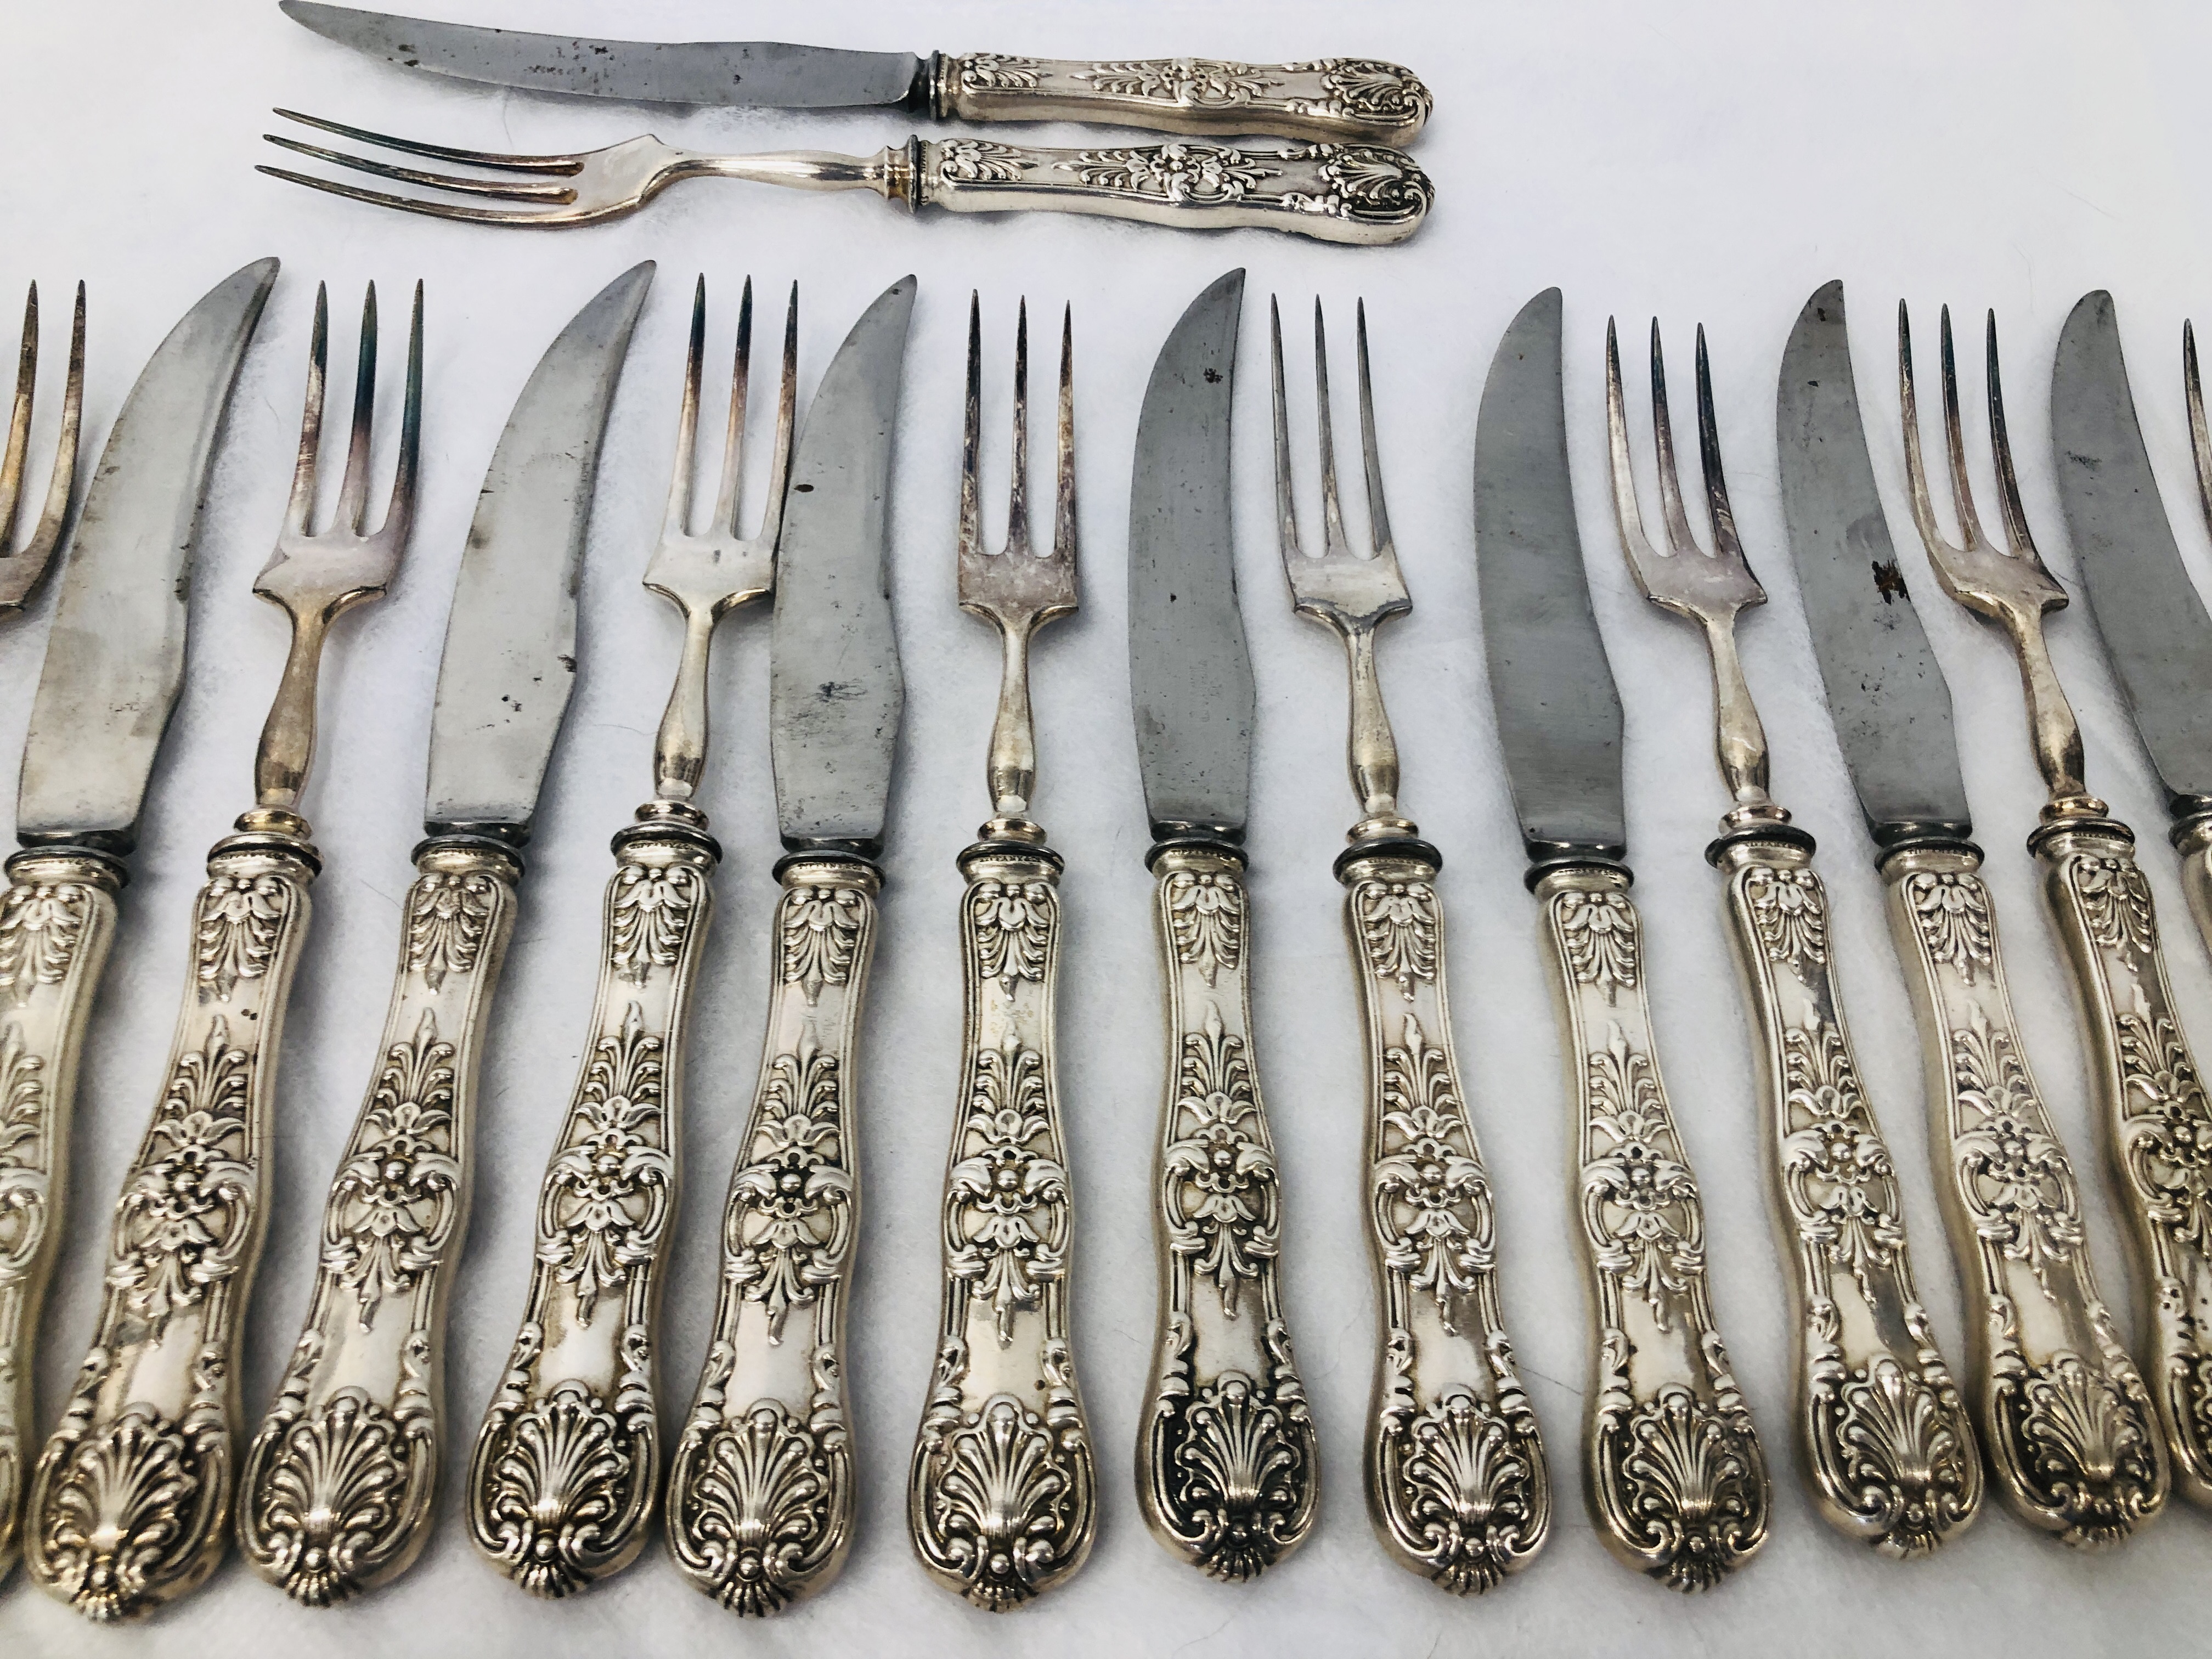 23 PIECES OF TIFFANY & Co SILVER HANDLED DESERT KNIVES AND FORKS - Image 3 of 8